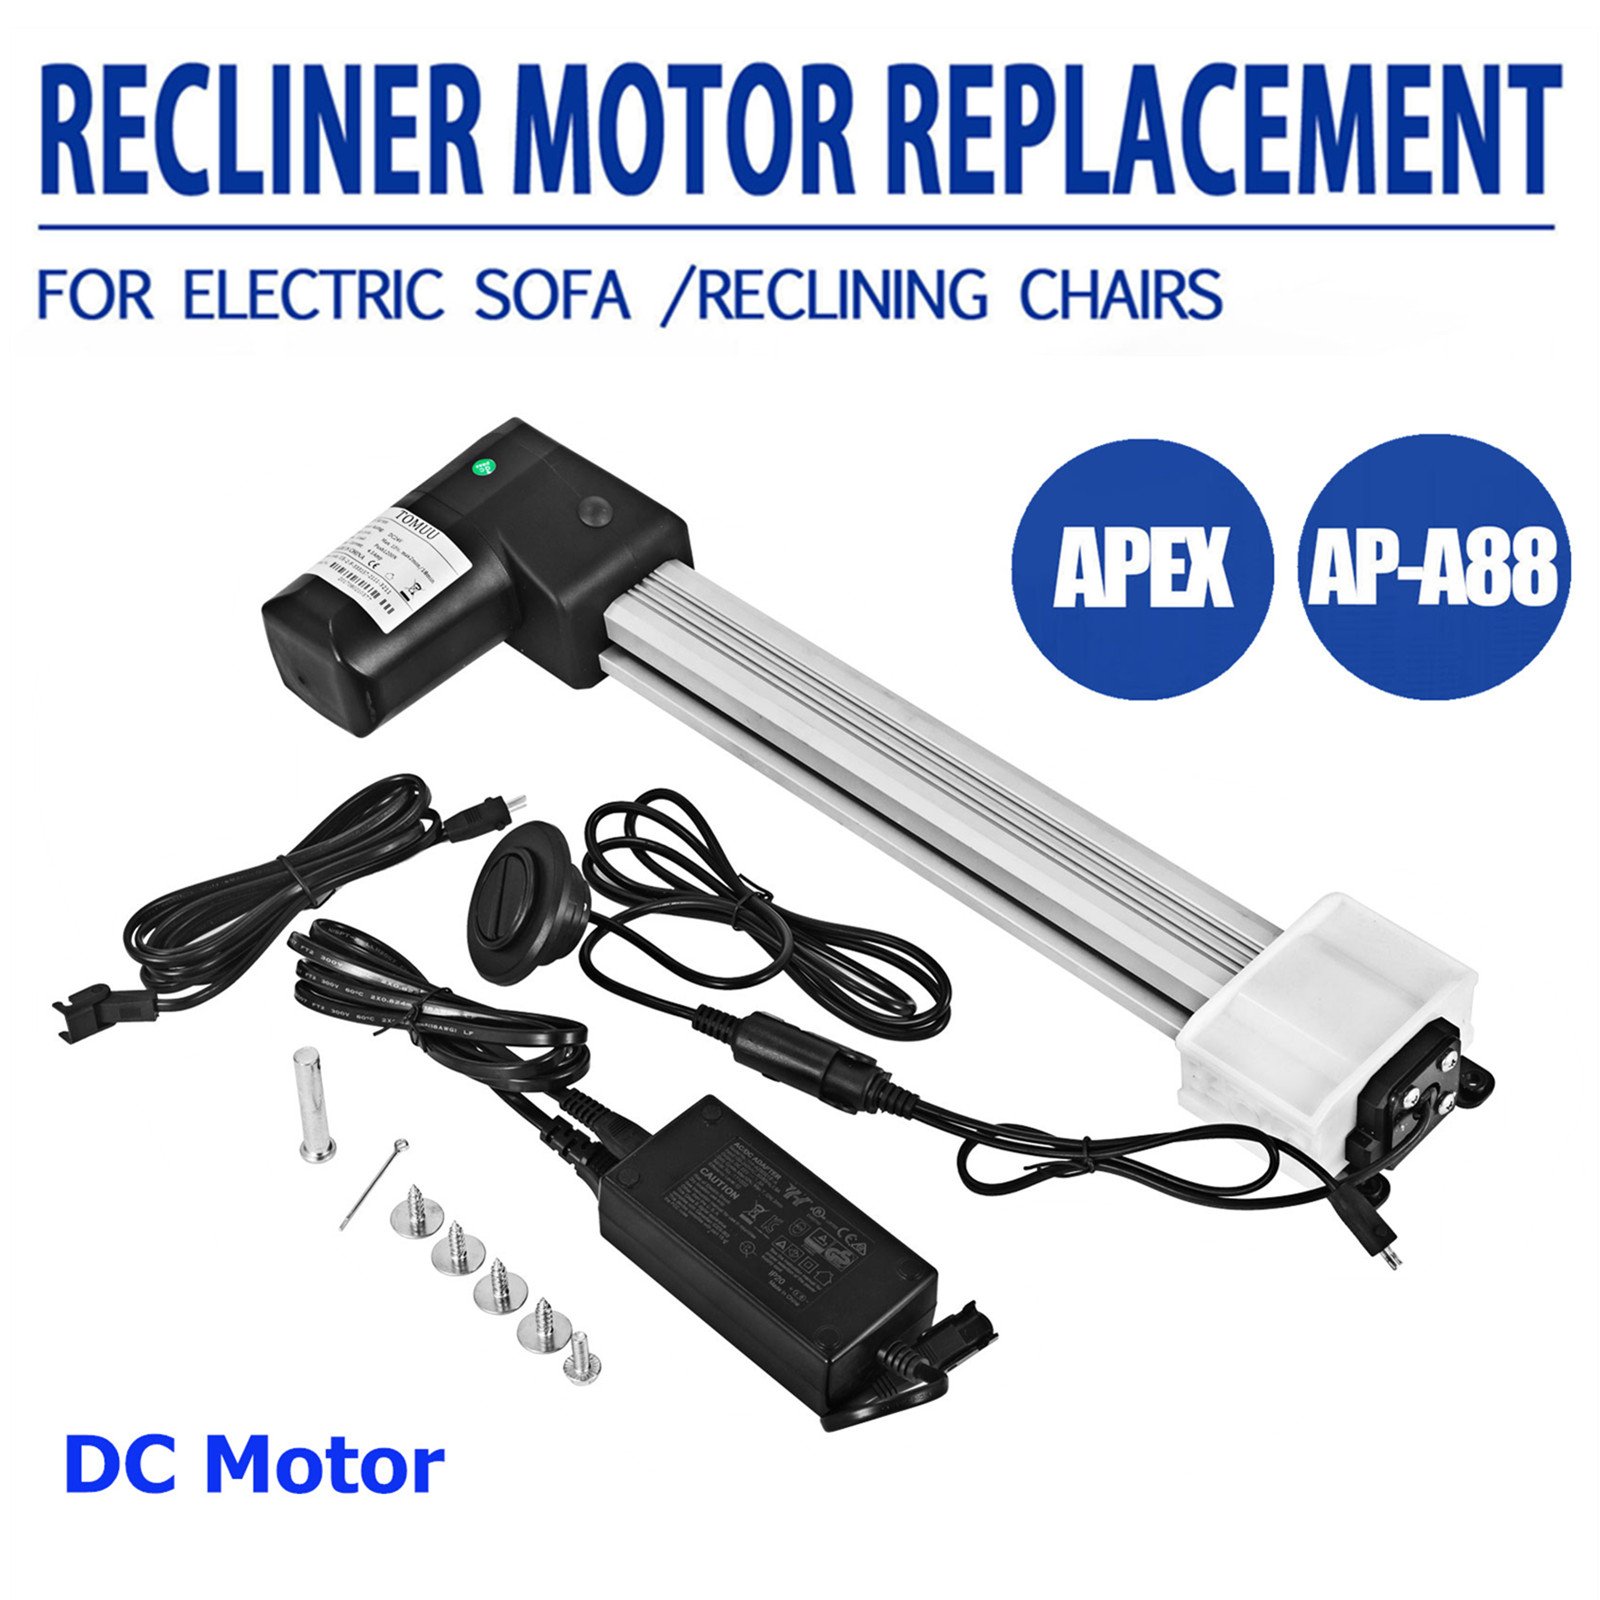 Mophorn 11.8 Inch Electric Recliner Motor Replacement Kit AP-A88 Okin Power Linear Actuator for Sofa Massage Chair, 11.8", White